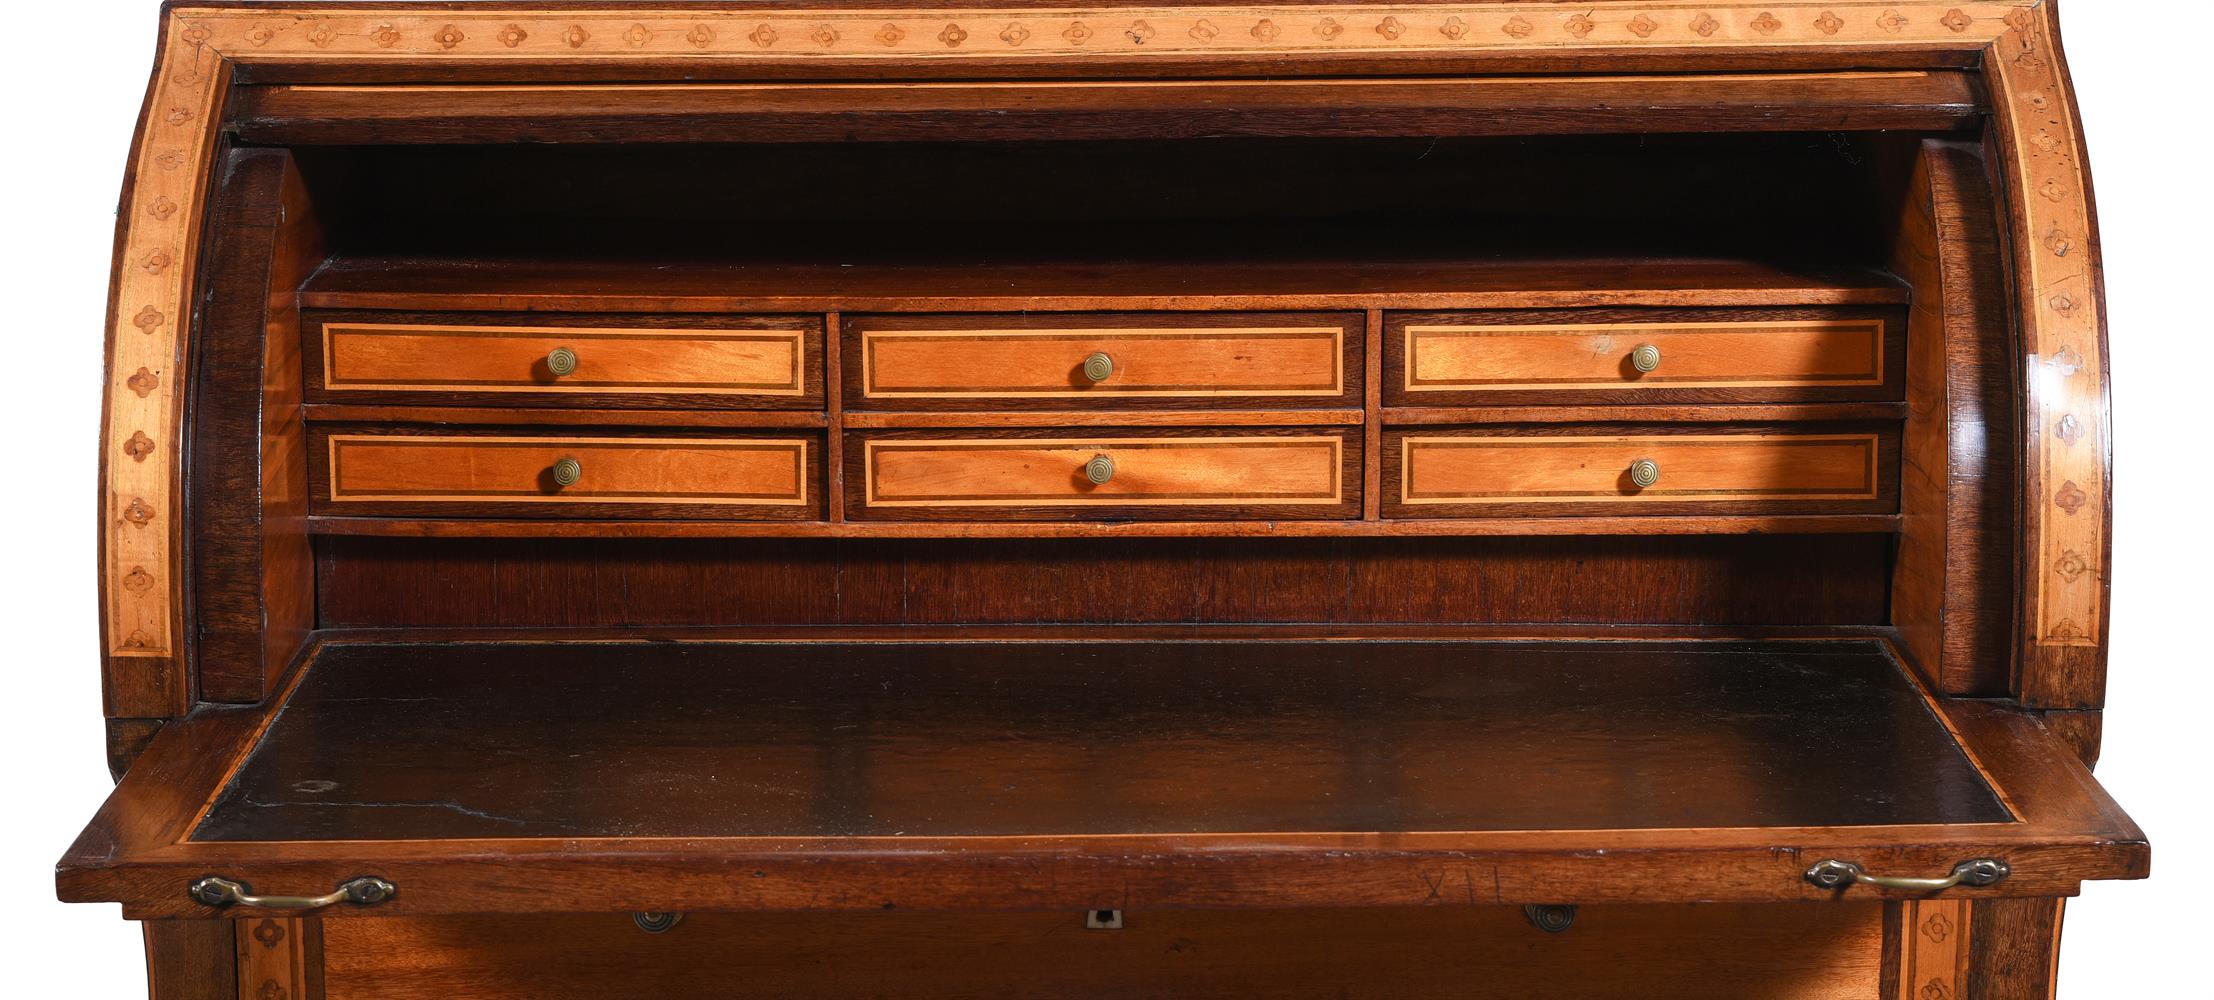 AN ITALIAN AMARANTH, SATINWOOD AND INLAID ROLL TOP DESK, LATE 18TH CENTURY - Image 2 of 3